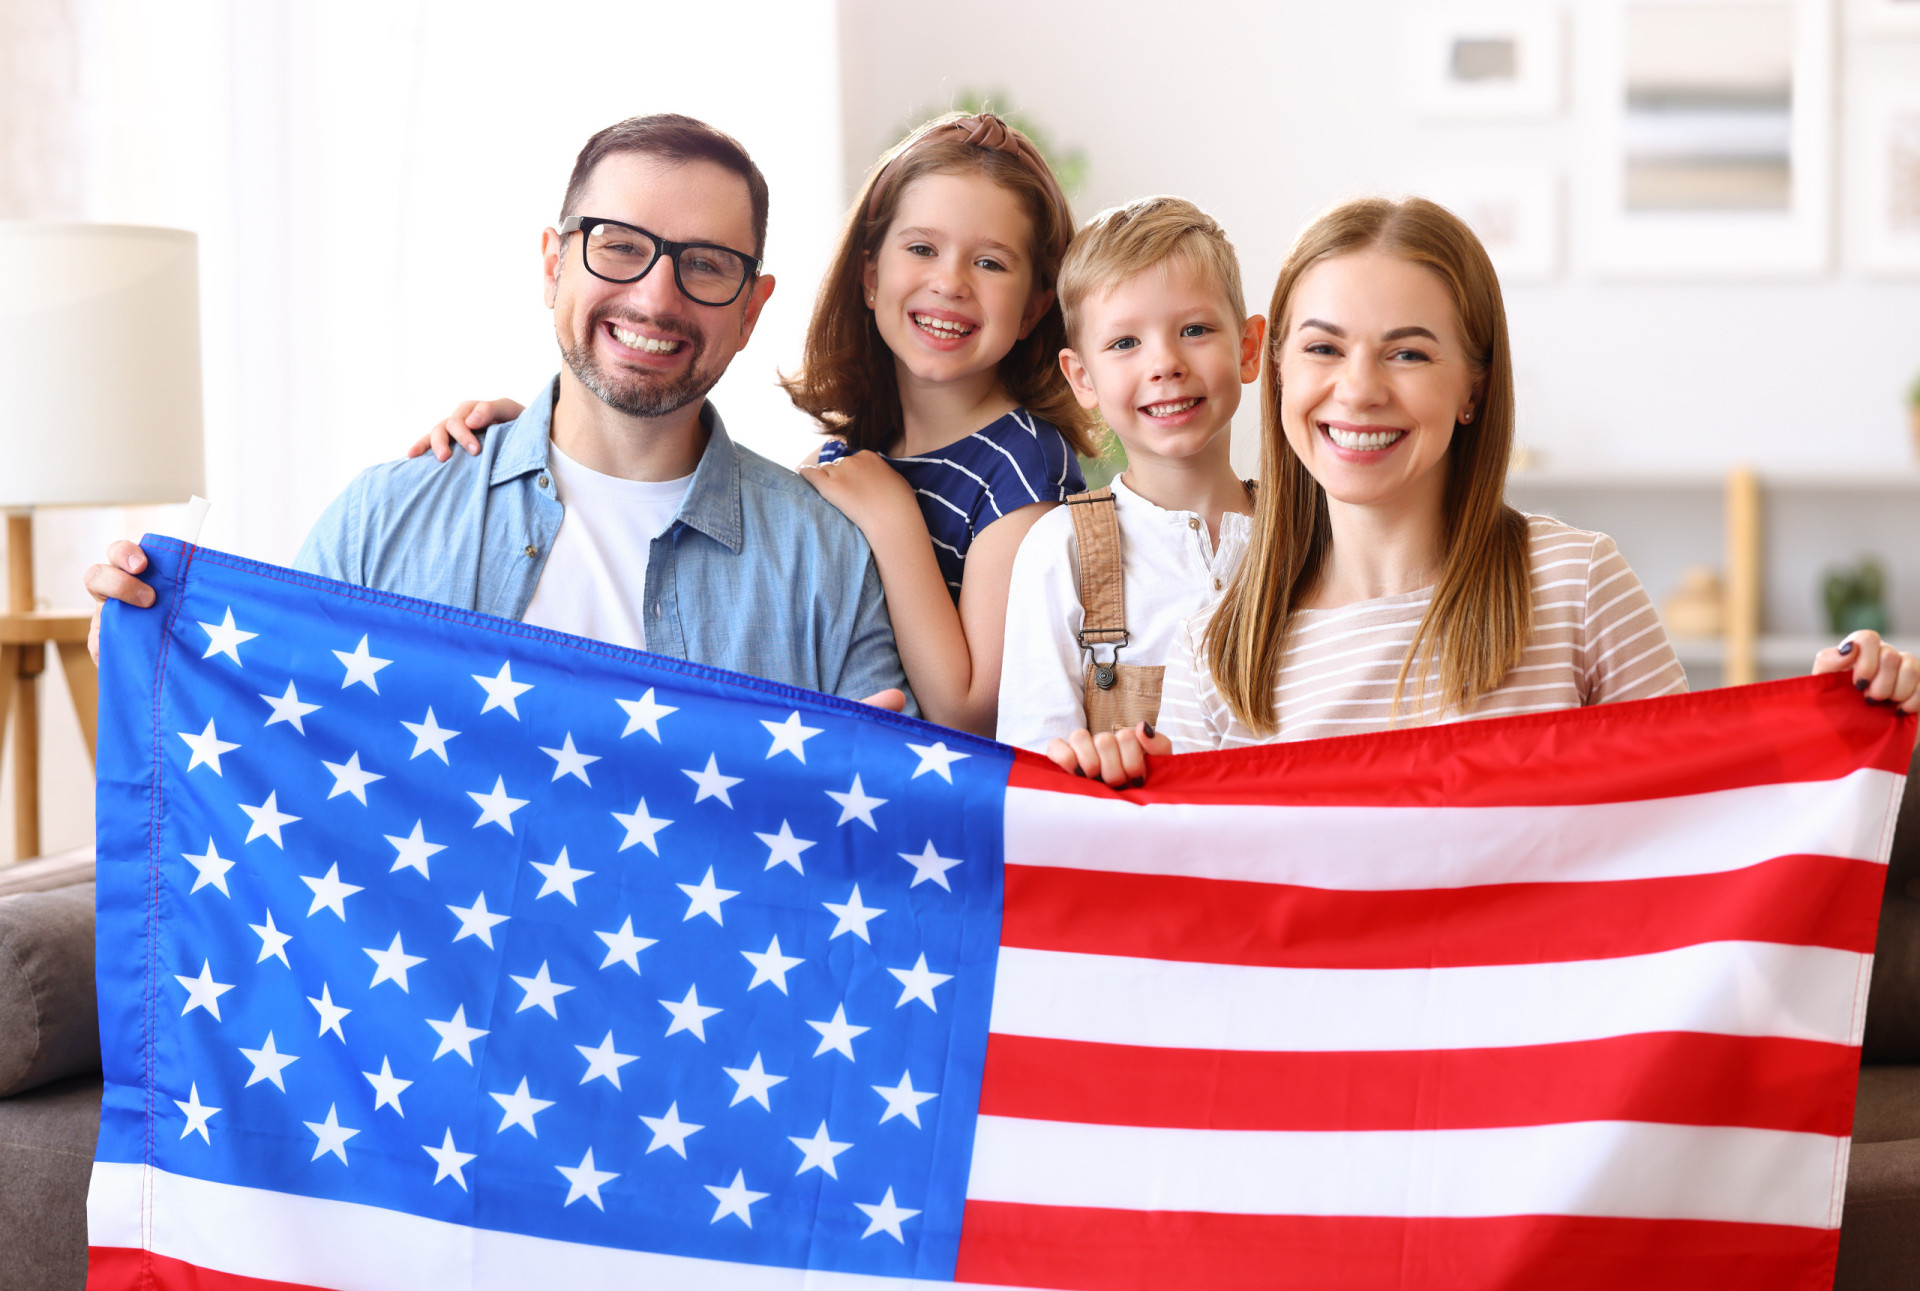 <p>You may be eligible to apply through family, for example if you are the spouse of an American citizen.</p><p><a href="https://www.msn.com/en-us/community/channel/vid-7xx8mnucu55yw63we9va2gwr7uihbxwc68fxqp25x6tg4ftibpra?cvid=94631541bc0f4f89bfd59158d696ad7e">Follow us and access great exclusive content every day</a></p>